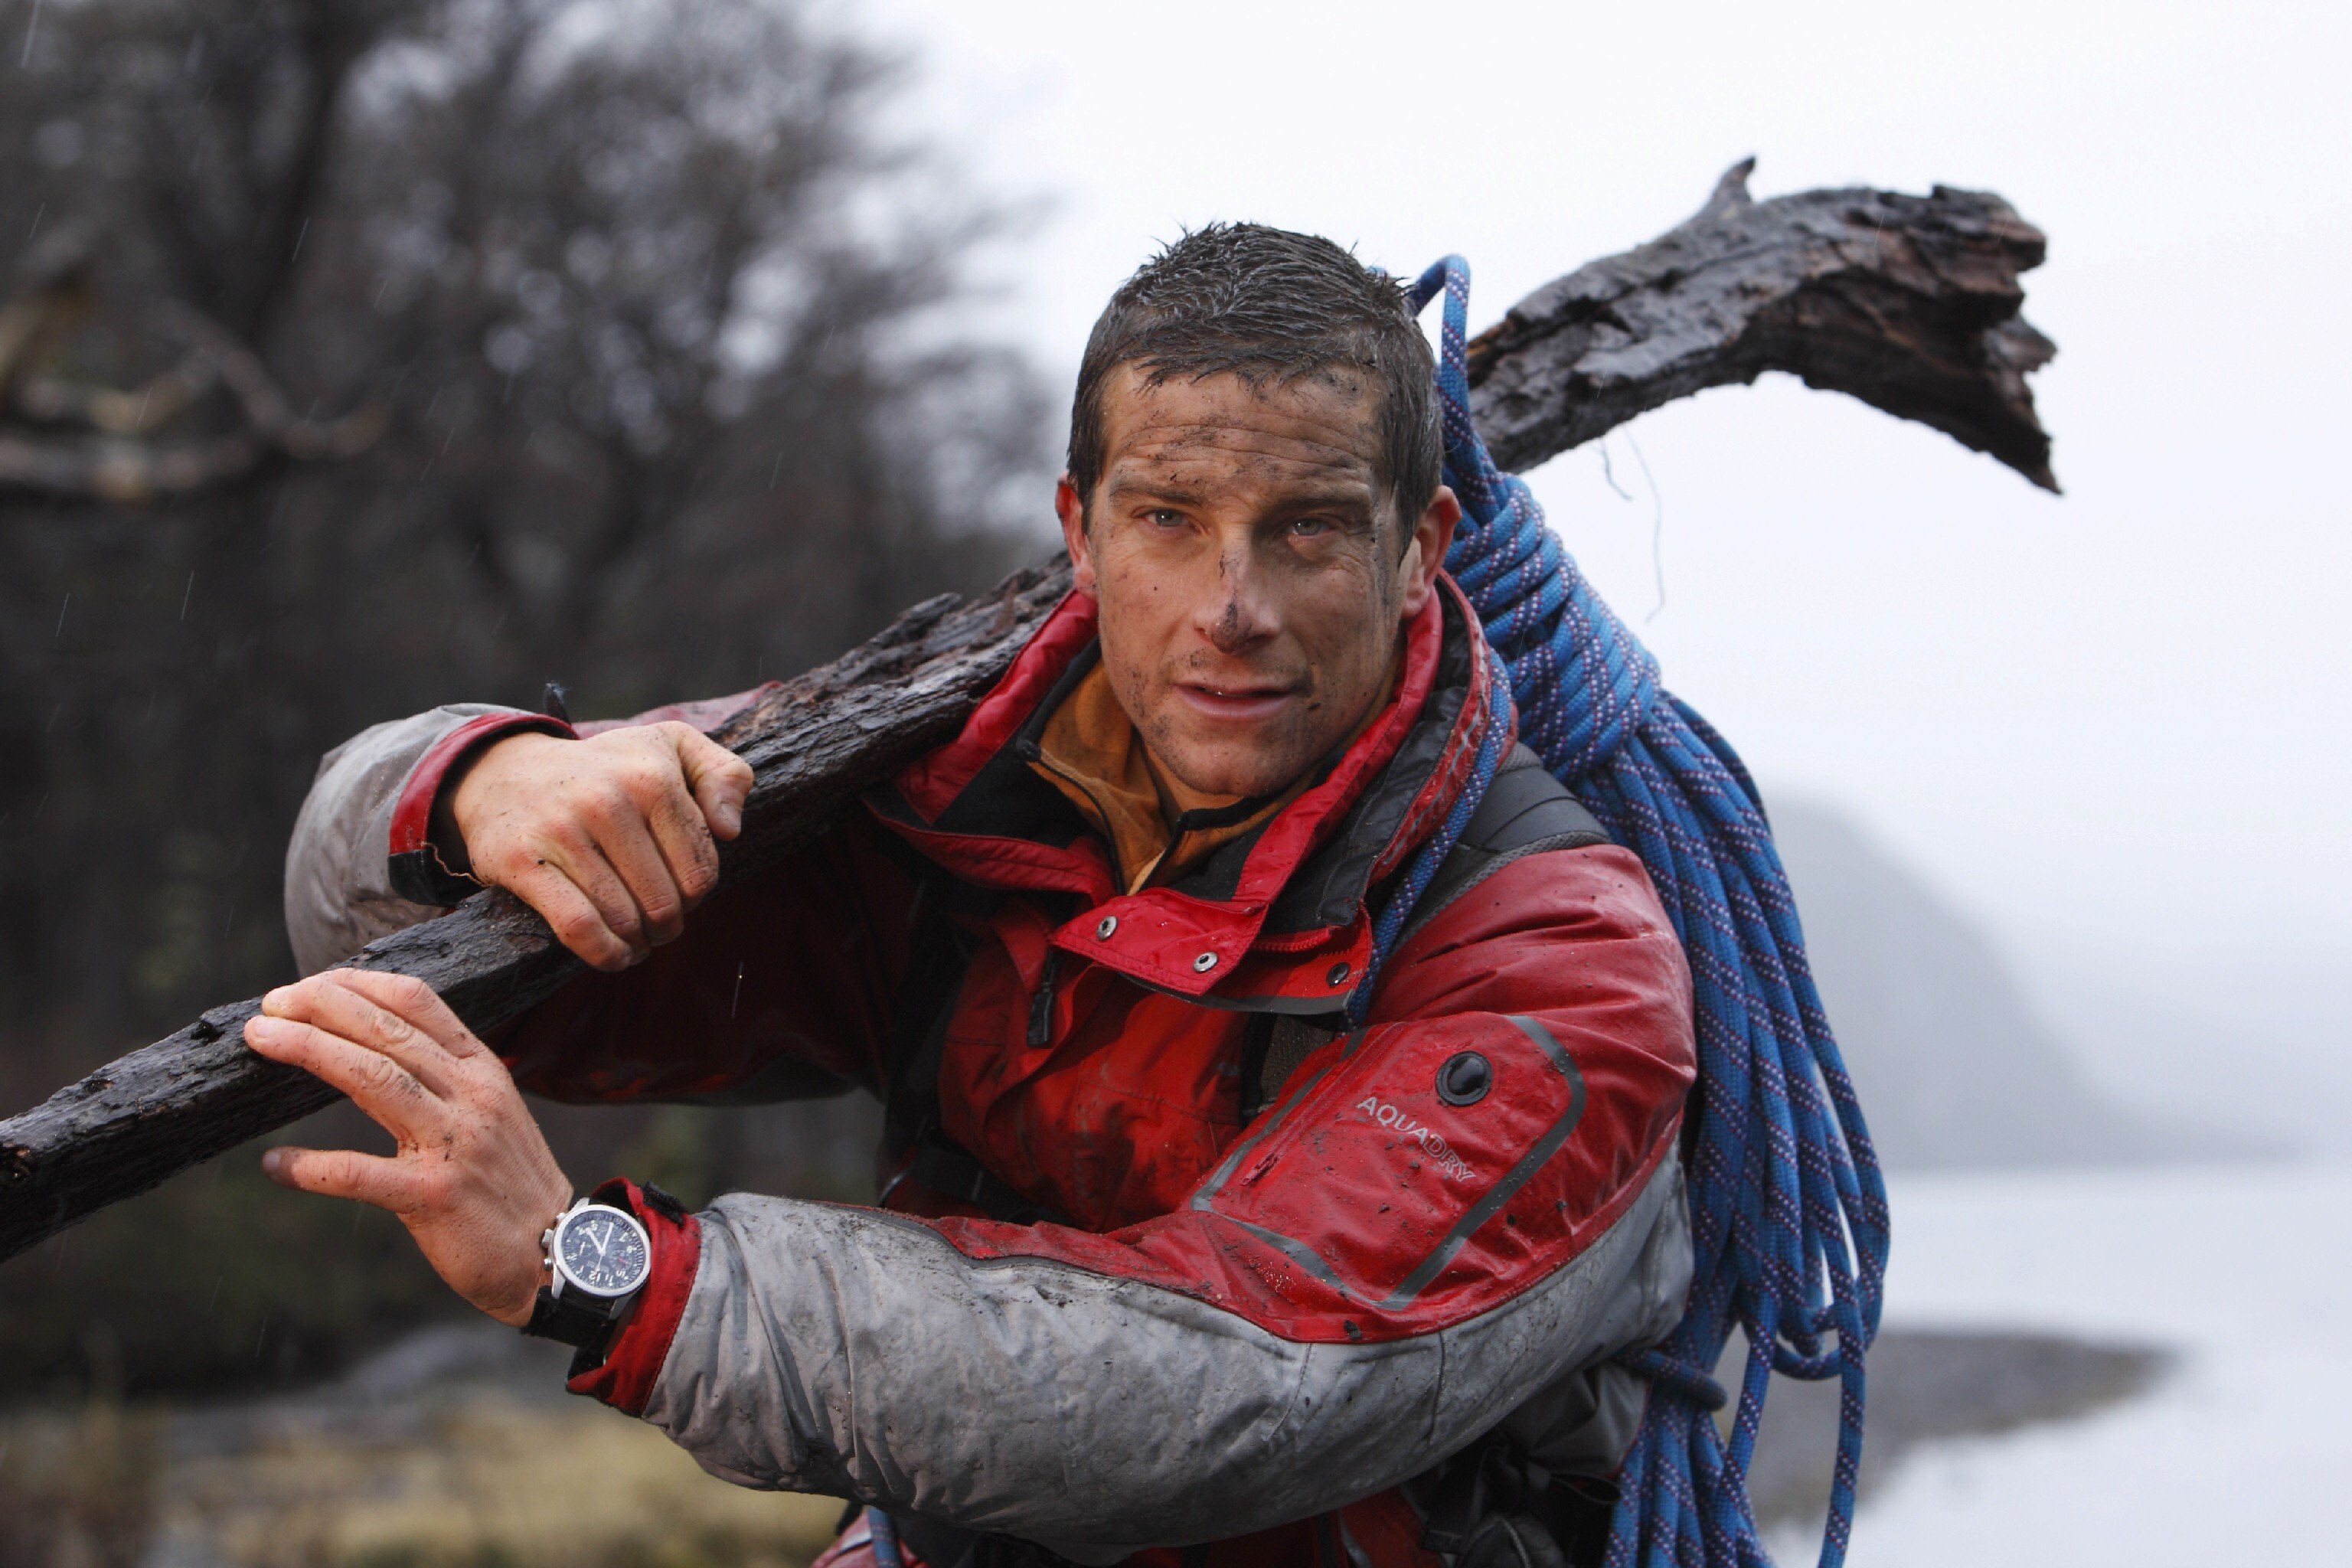 Bear Grylls hosted Amazon’s coverage of the ‘Eco-Challenge: World’s Toughest Race’ in 2020. Photo: Handout